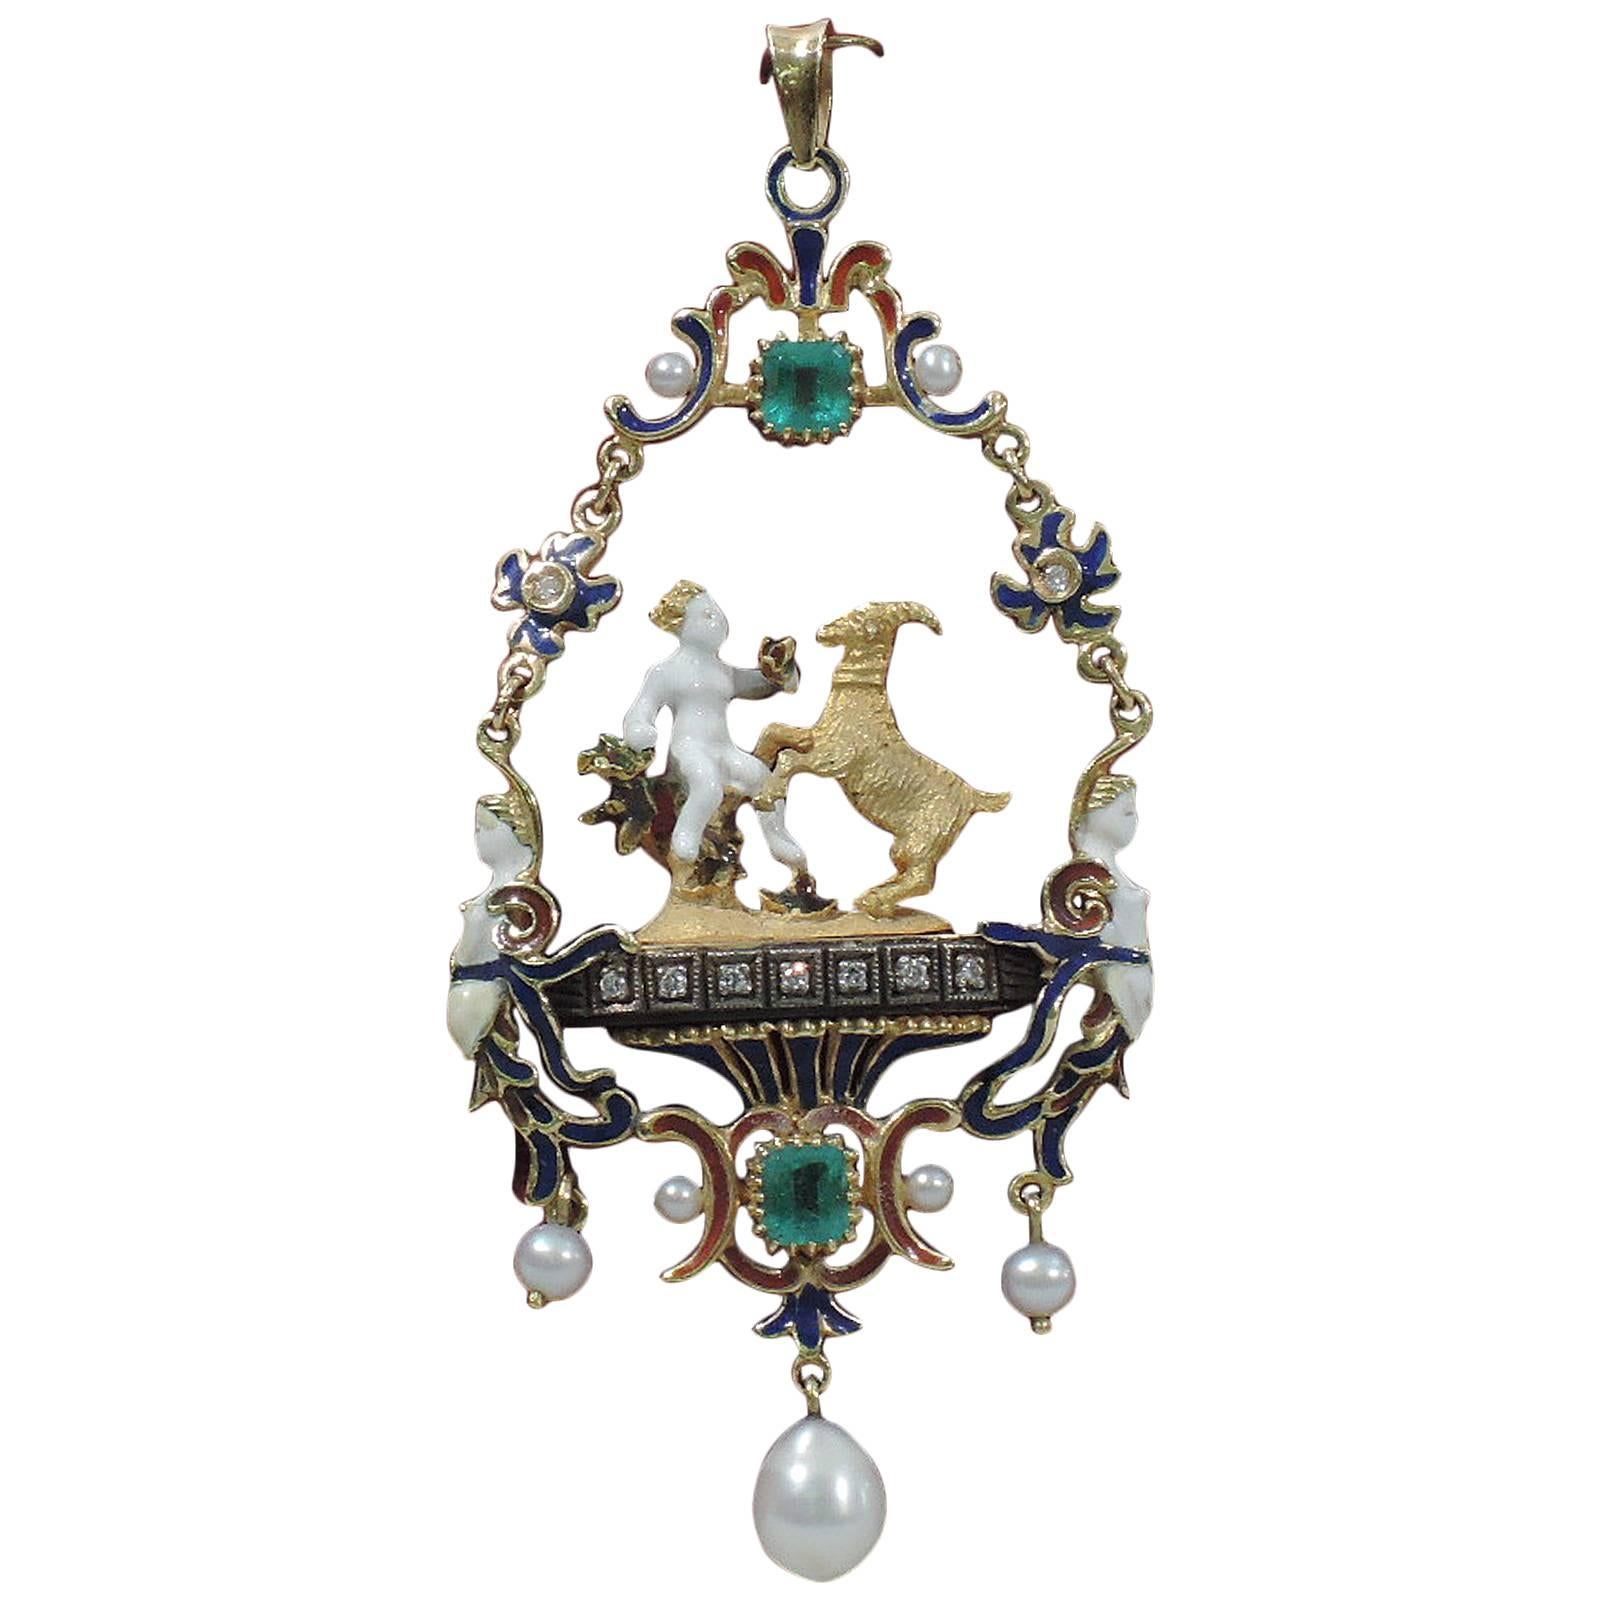 Renaissance Revival Gold and Enamel Pendant with Pearls and Emeralds